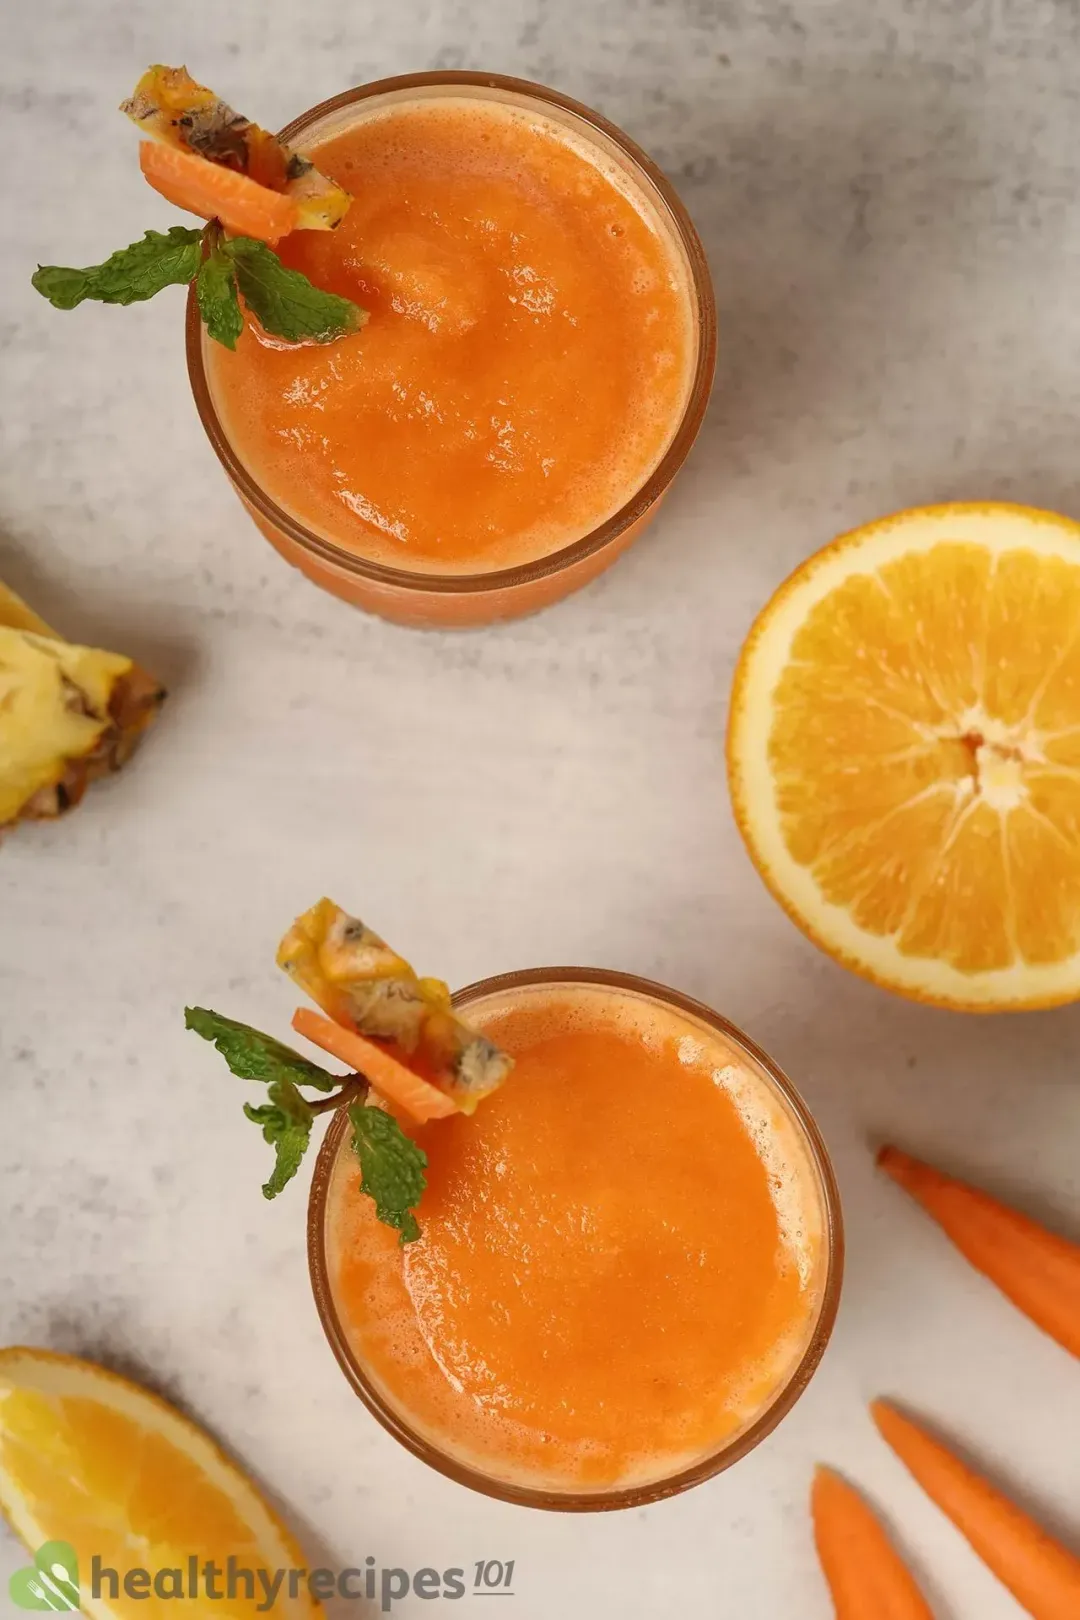 Benefits of This Carrot Smoothie